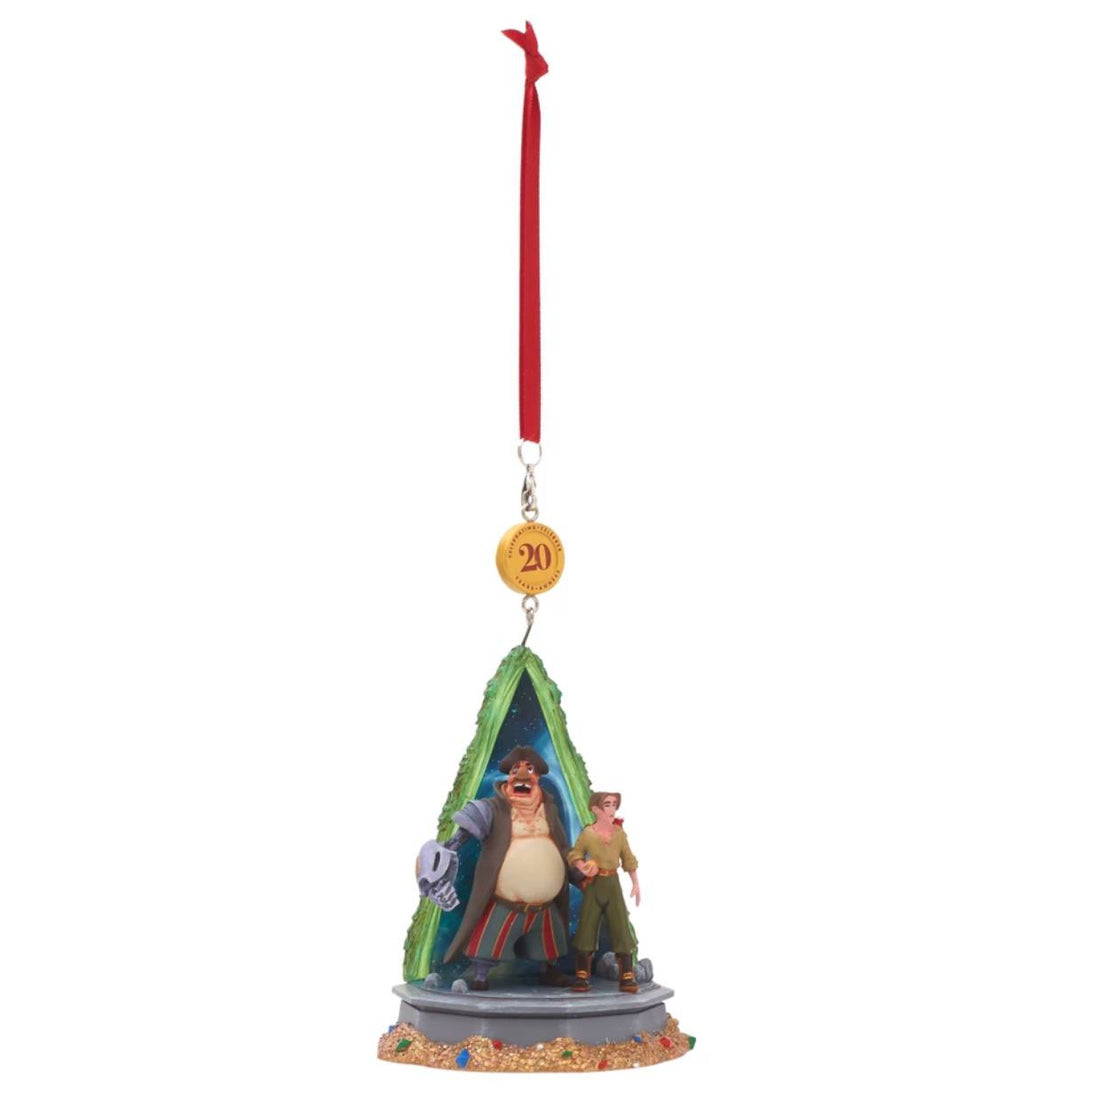 Treasure Planet Legacy Sketchbook Ornament, 20th Anniversary, Limited Release